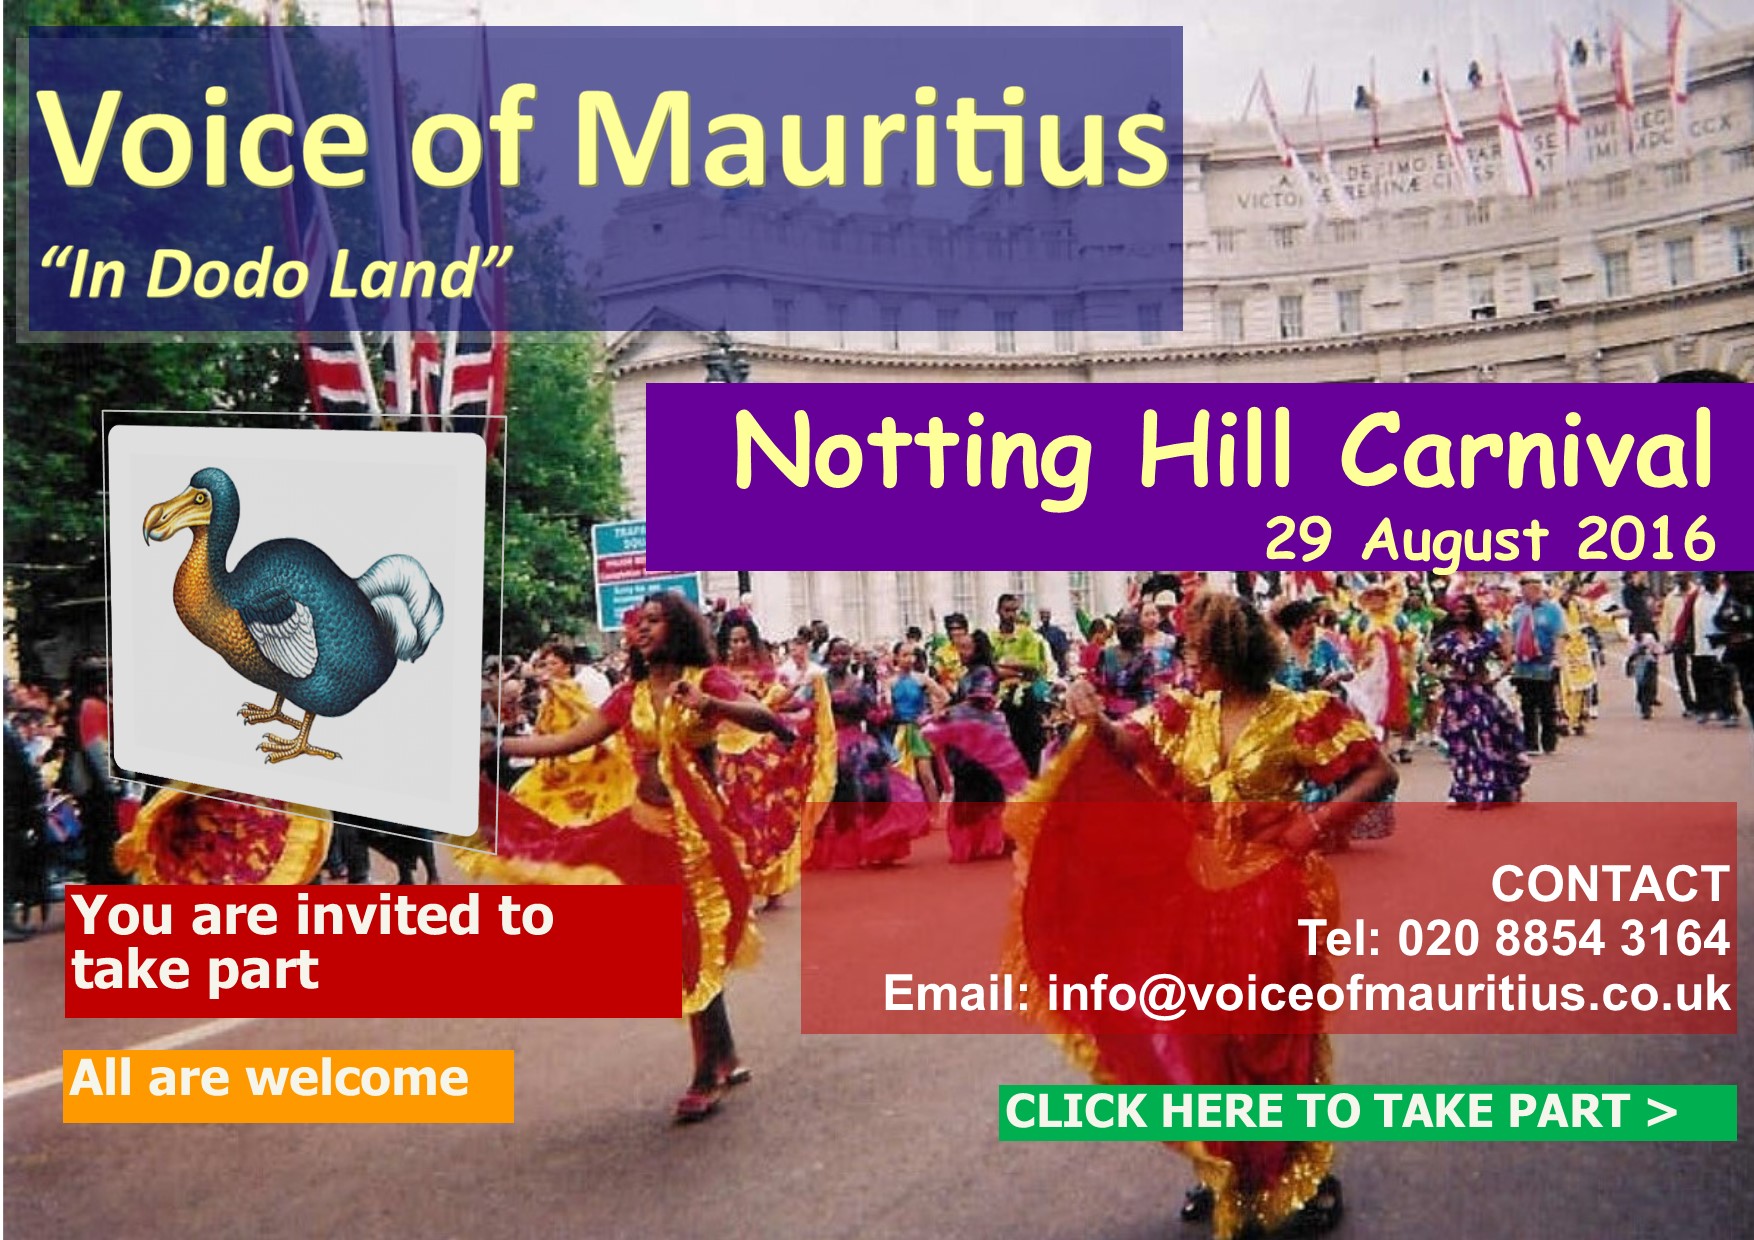 Notting Hill Carnival August 2016 coming up